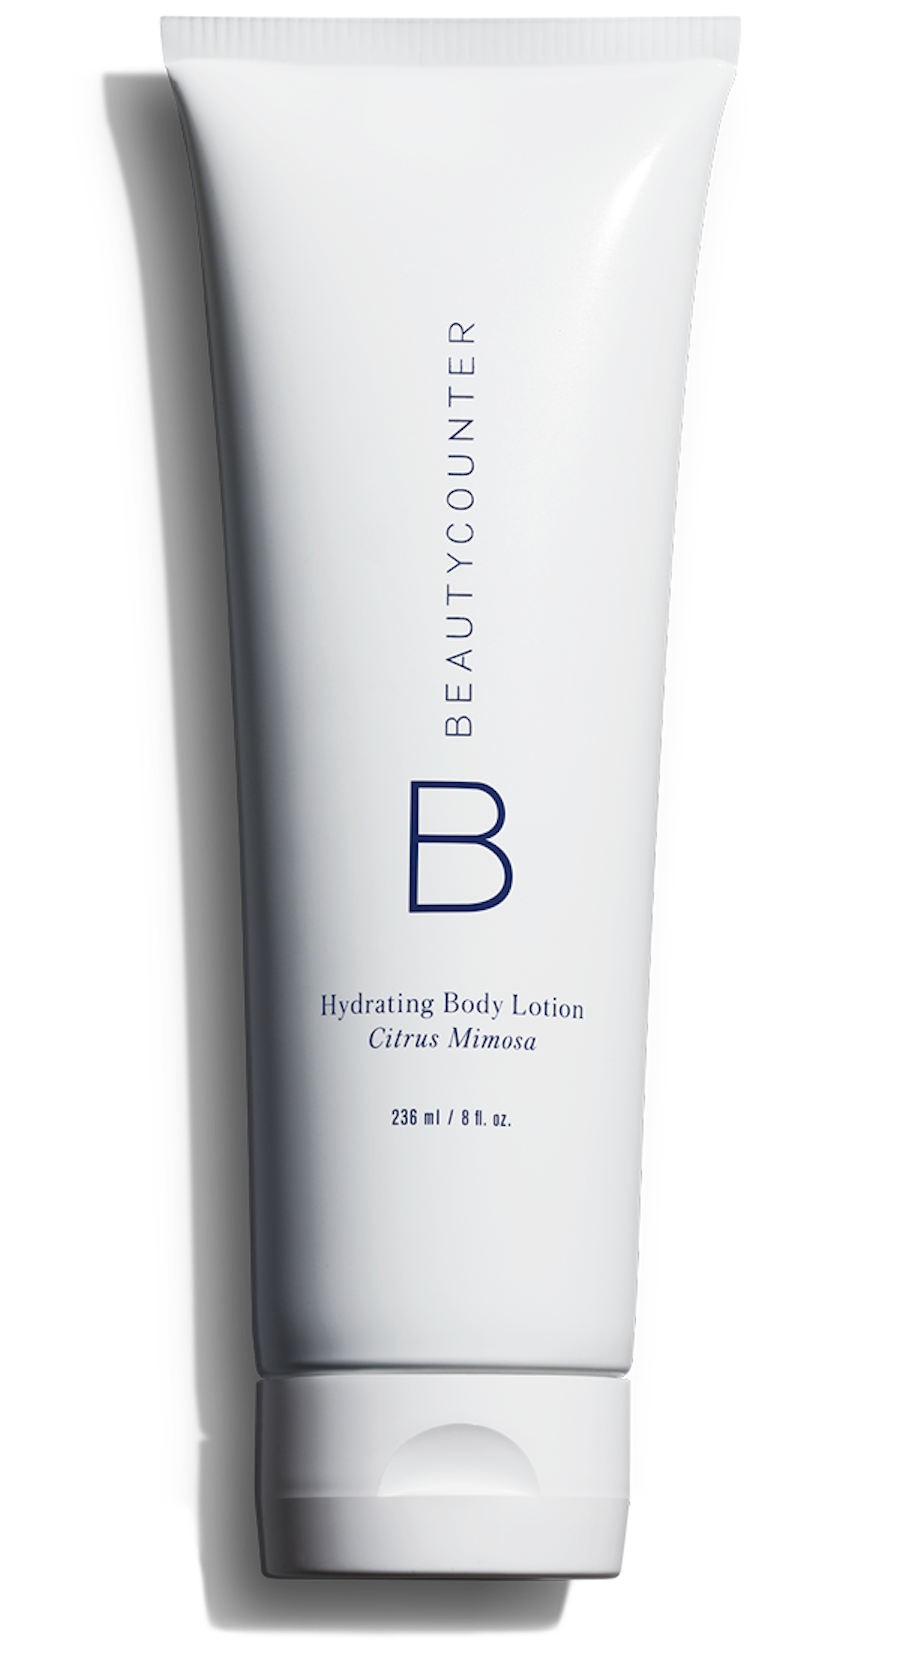 Hydrating Body Lotion in Citrus Mimosa